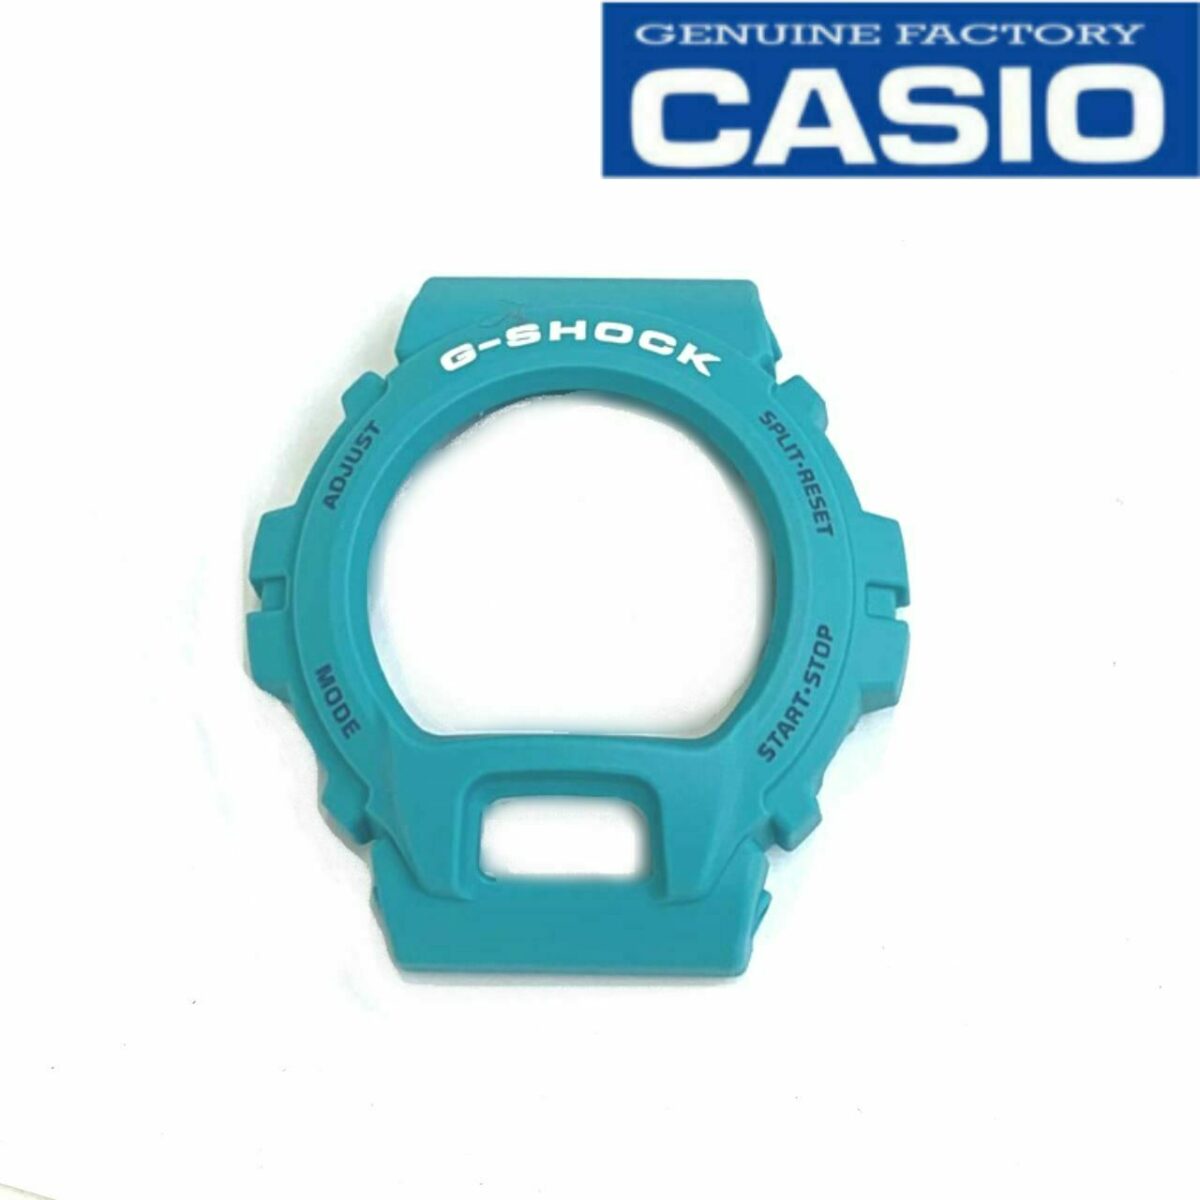 Genuine Casio Watch Bezel Teal Blue White Text 10392523 for DW 6900 DW 6900SN 3 193877495719 - Maddisons UK